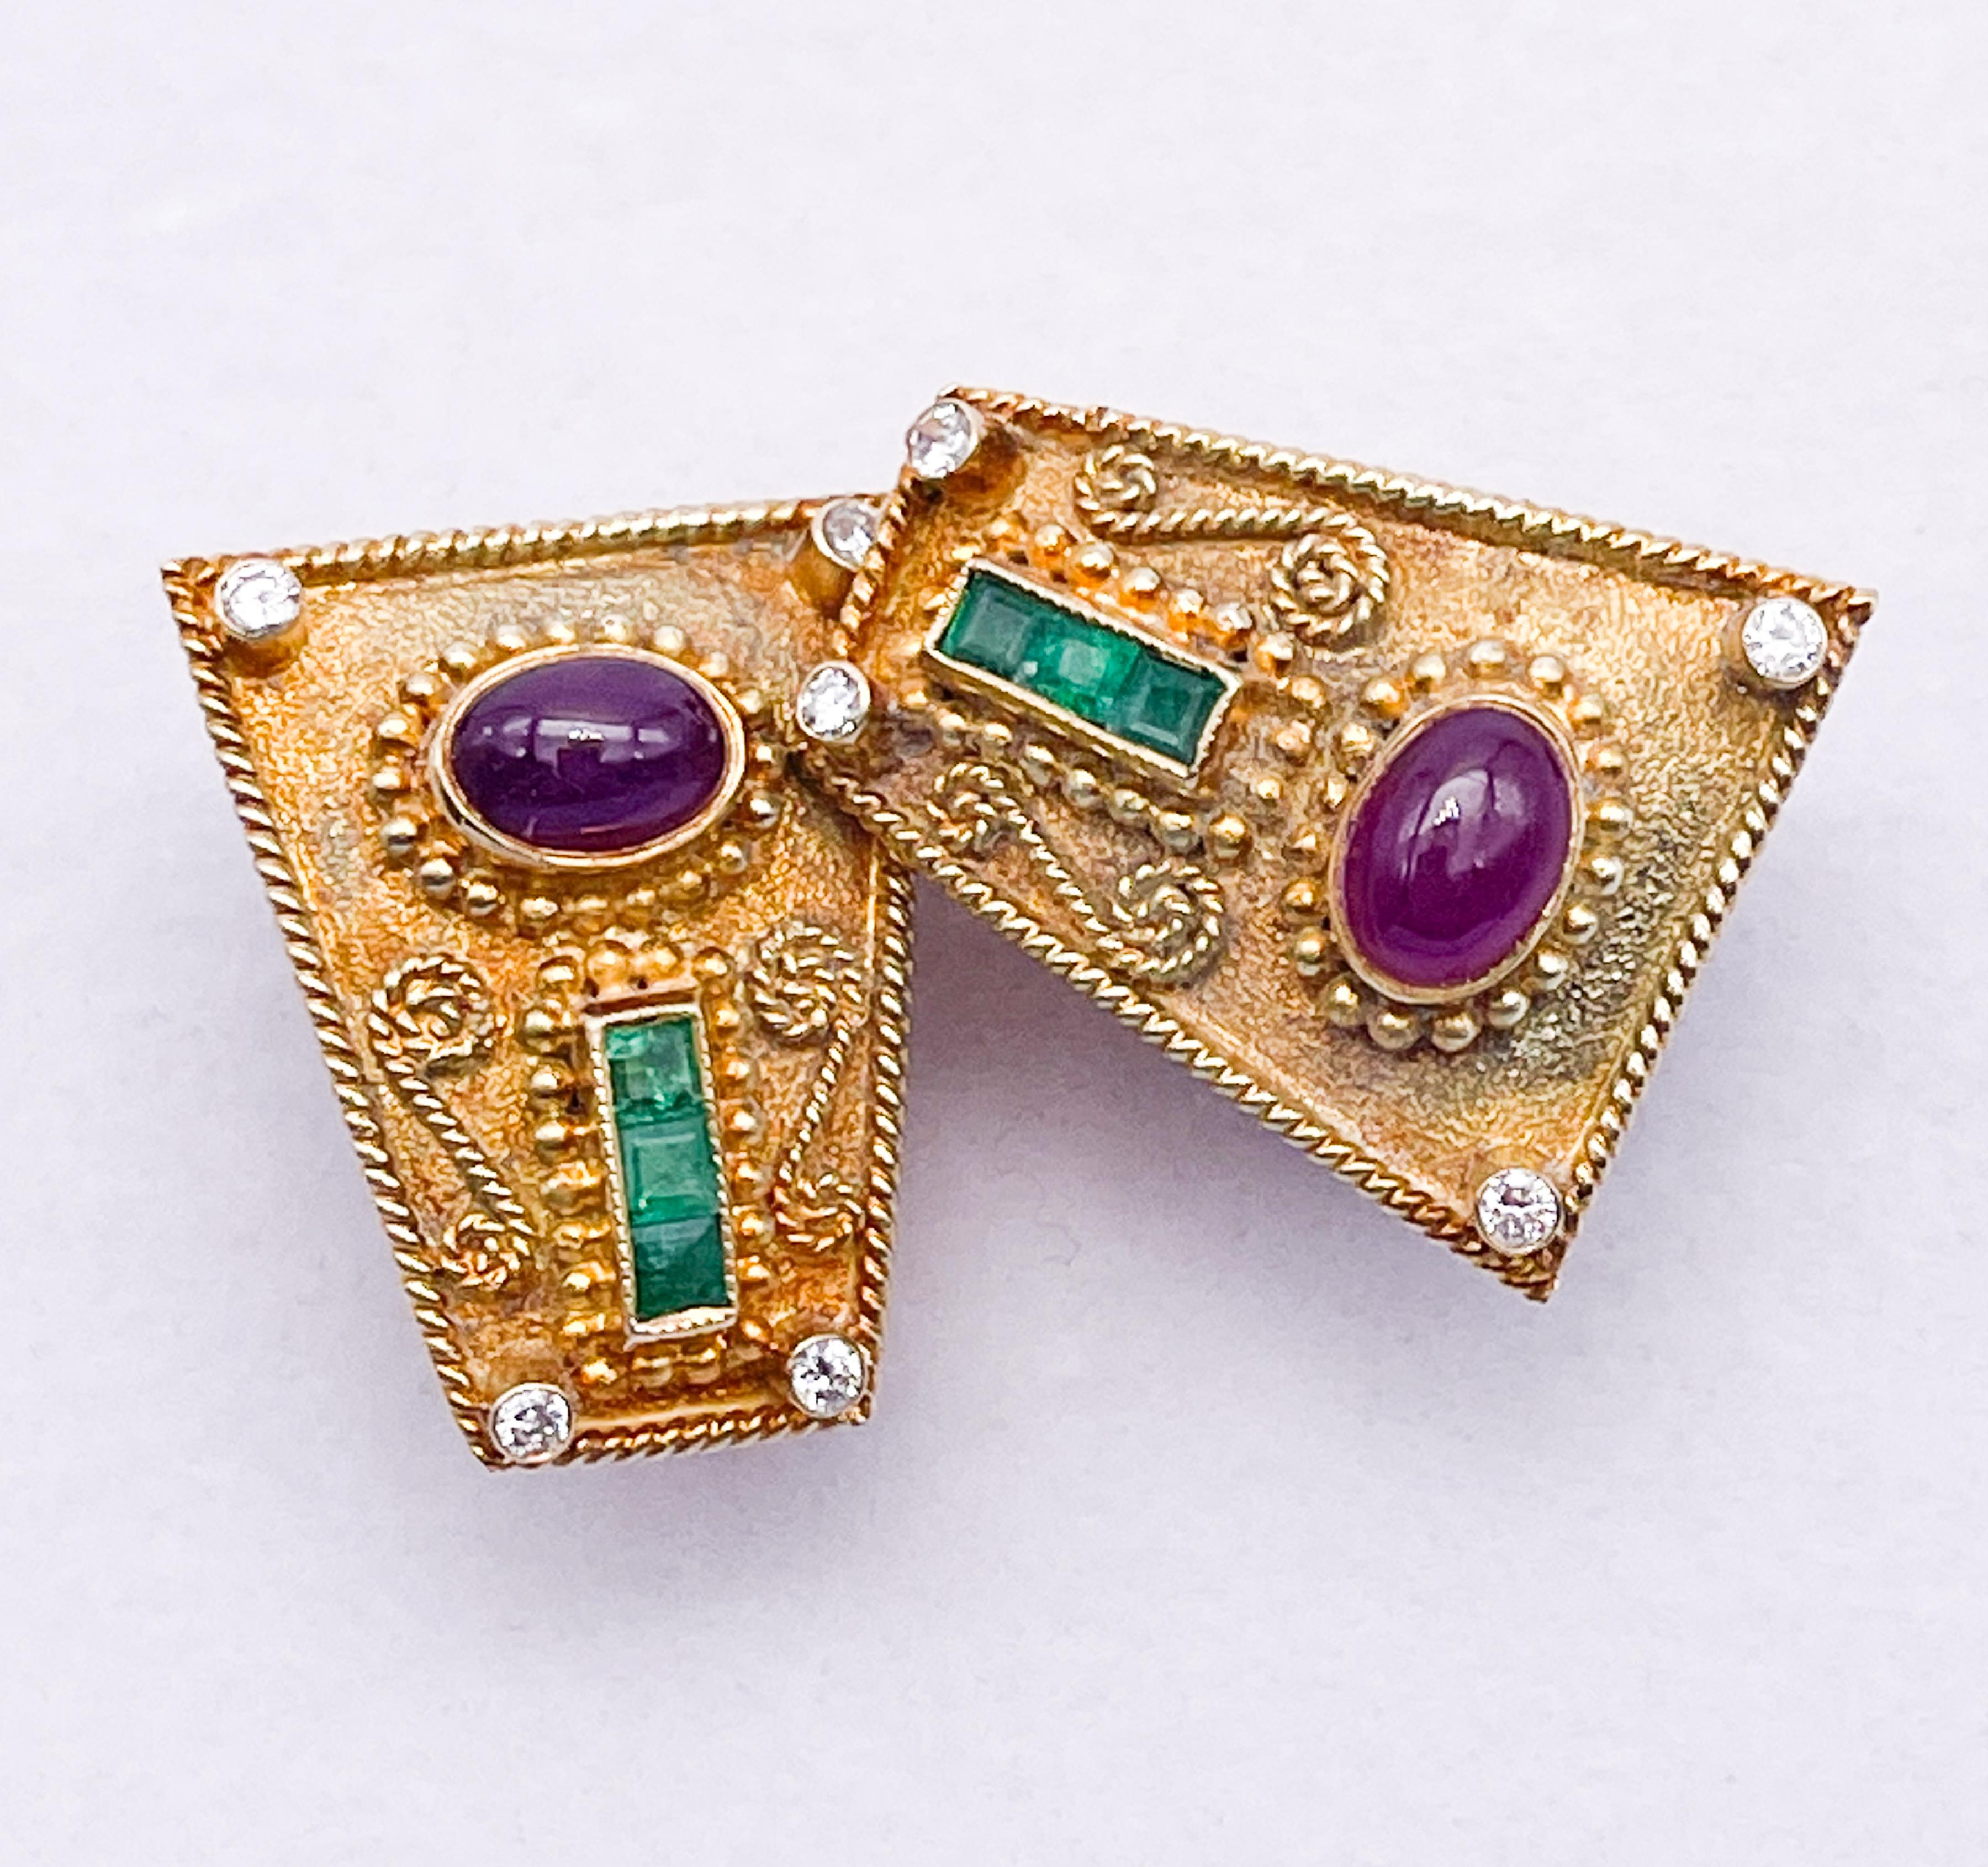 Vintage Greek Jewelry Designer GIKAS 

18K RUBY, EMERALD & DIAMOND EARRINGS

Rare Pair of Vintage Earrings from a Collectible Greek Designer

18K Yellow Gold

Featuring Square Step Cut Emeralds & Oval Ruby Cabochons

Marks: 750, Designer Signature,